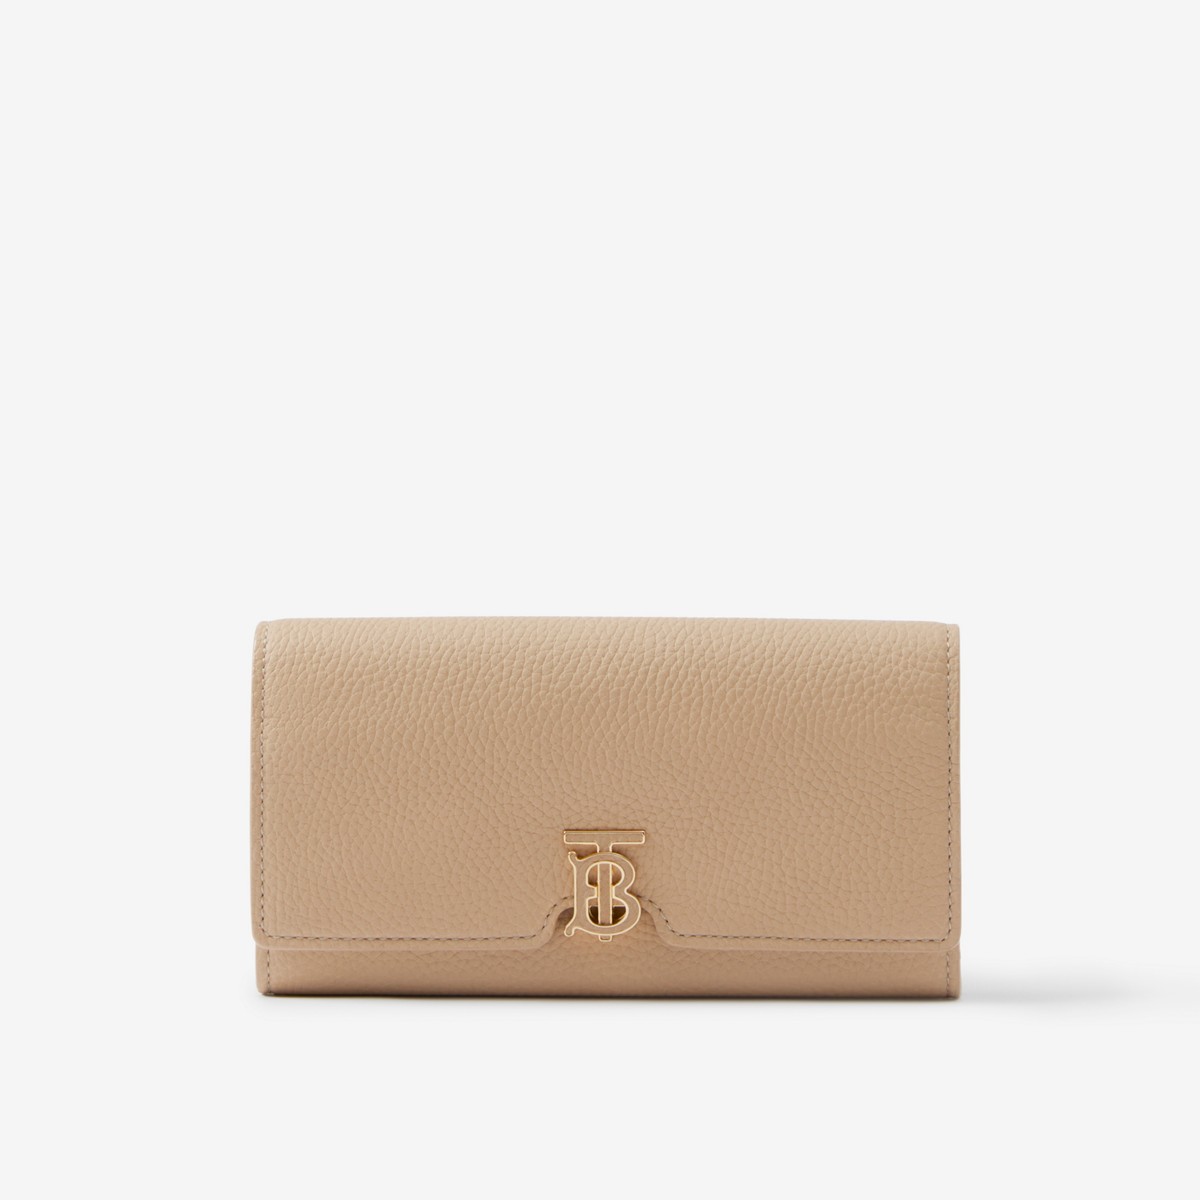 Burberry Grainy Leather Tb Continental Wallet In Oat Beige